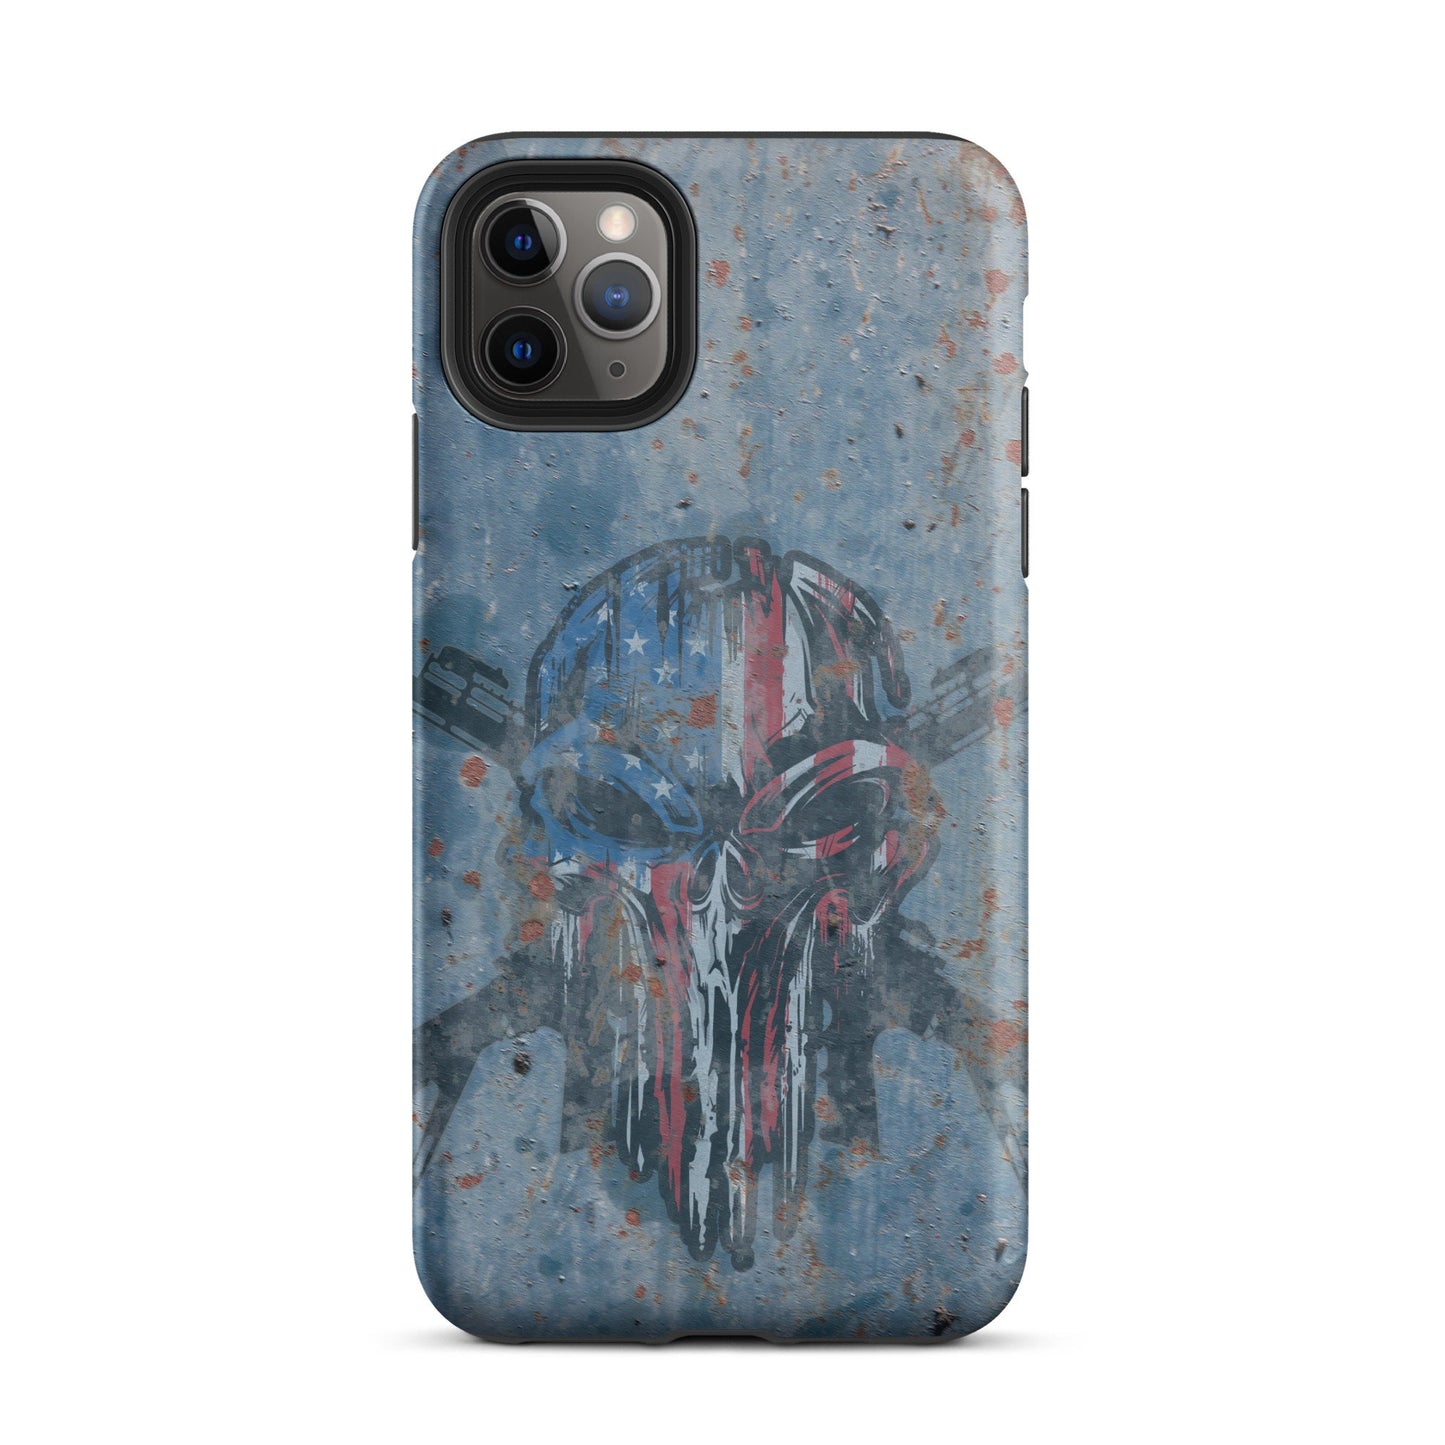 Punisher iPhone Case Vintage Distressed Rusted Phone Case Military and Outdoor Second Amendment Gun Owner Protective Case